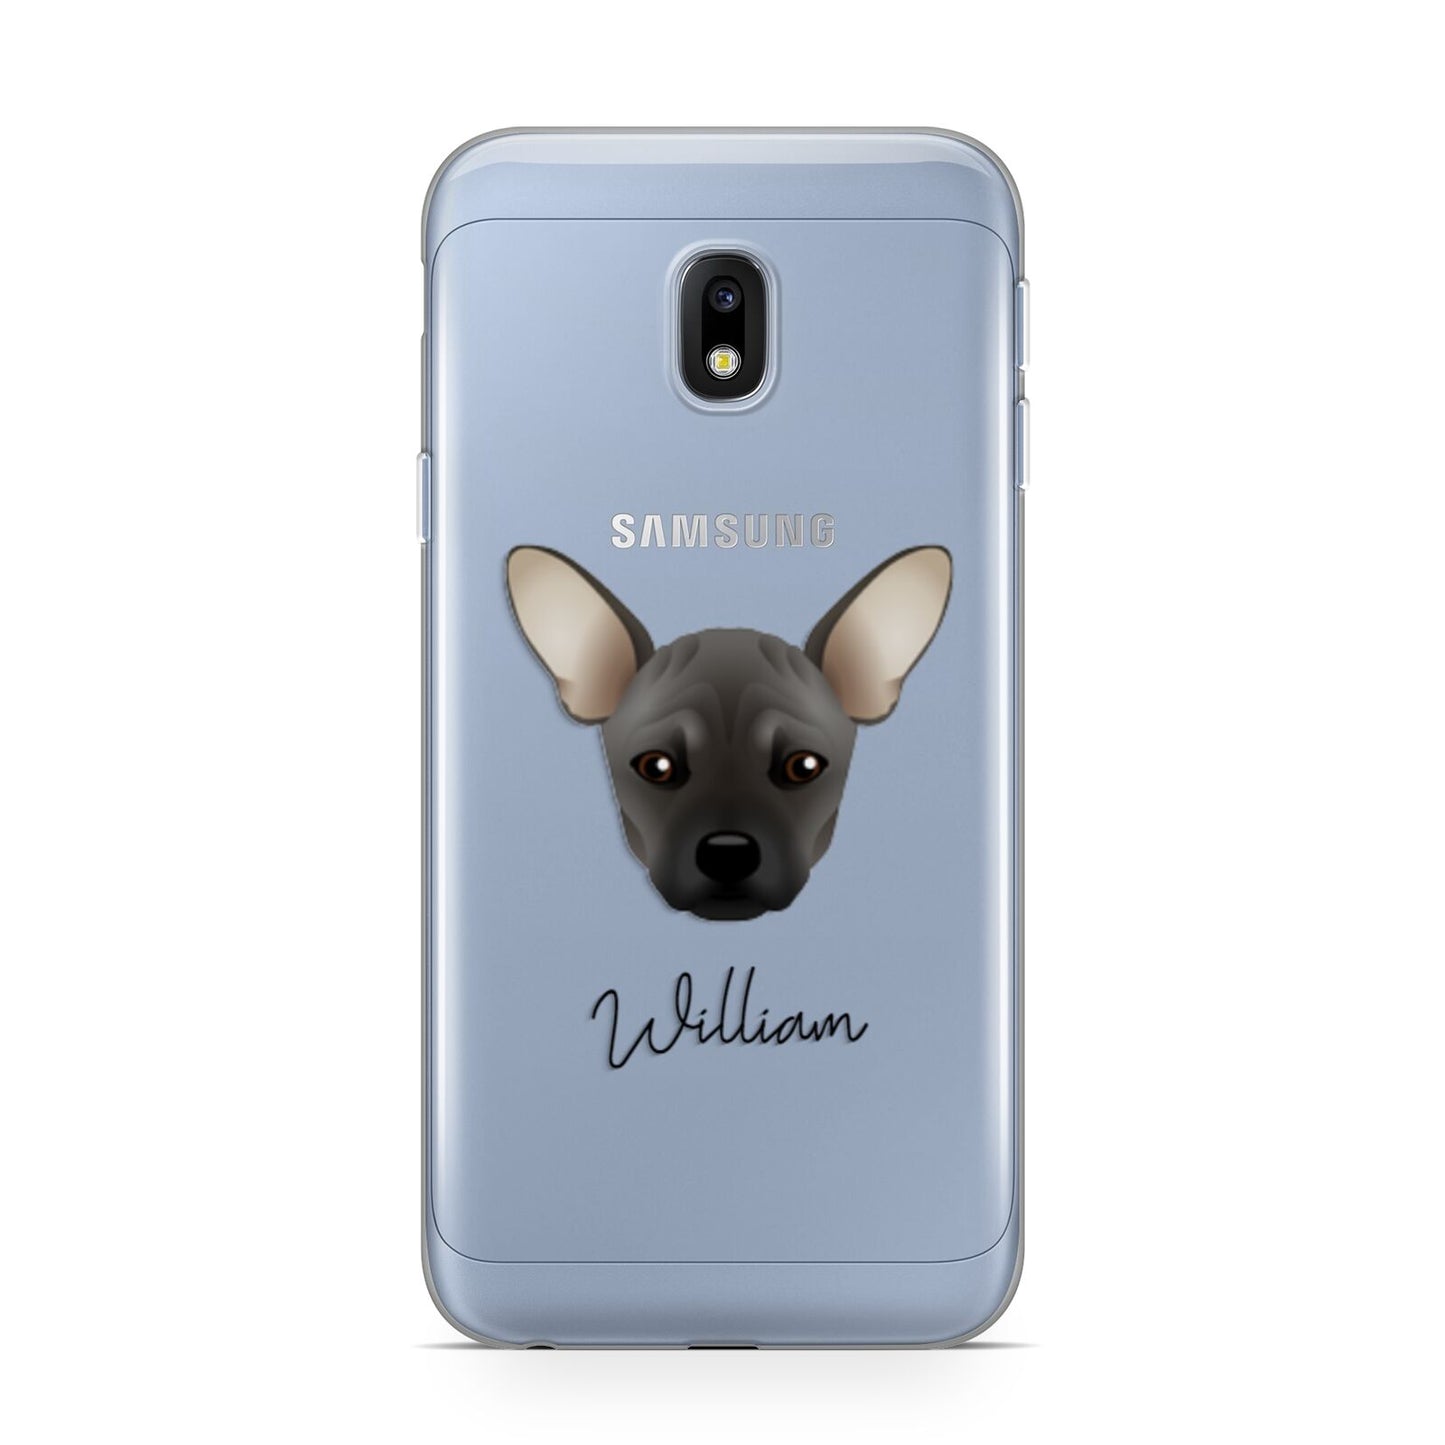 French Pin Personalised Samsung Galaxy J3 2017 Case